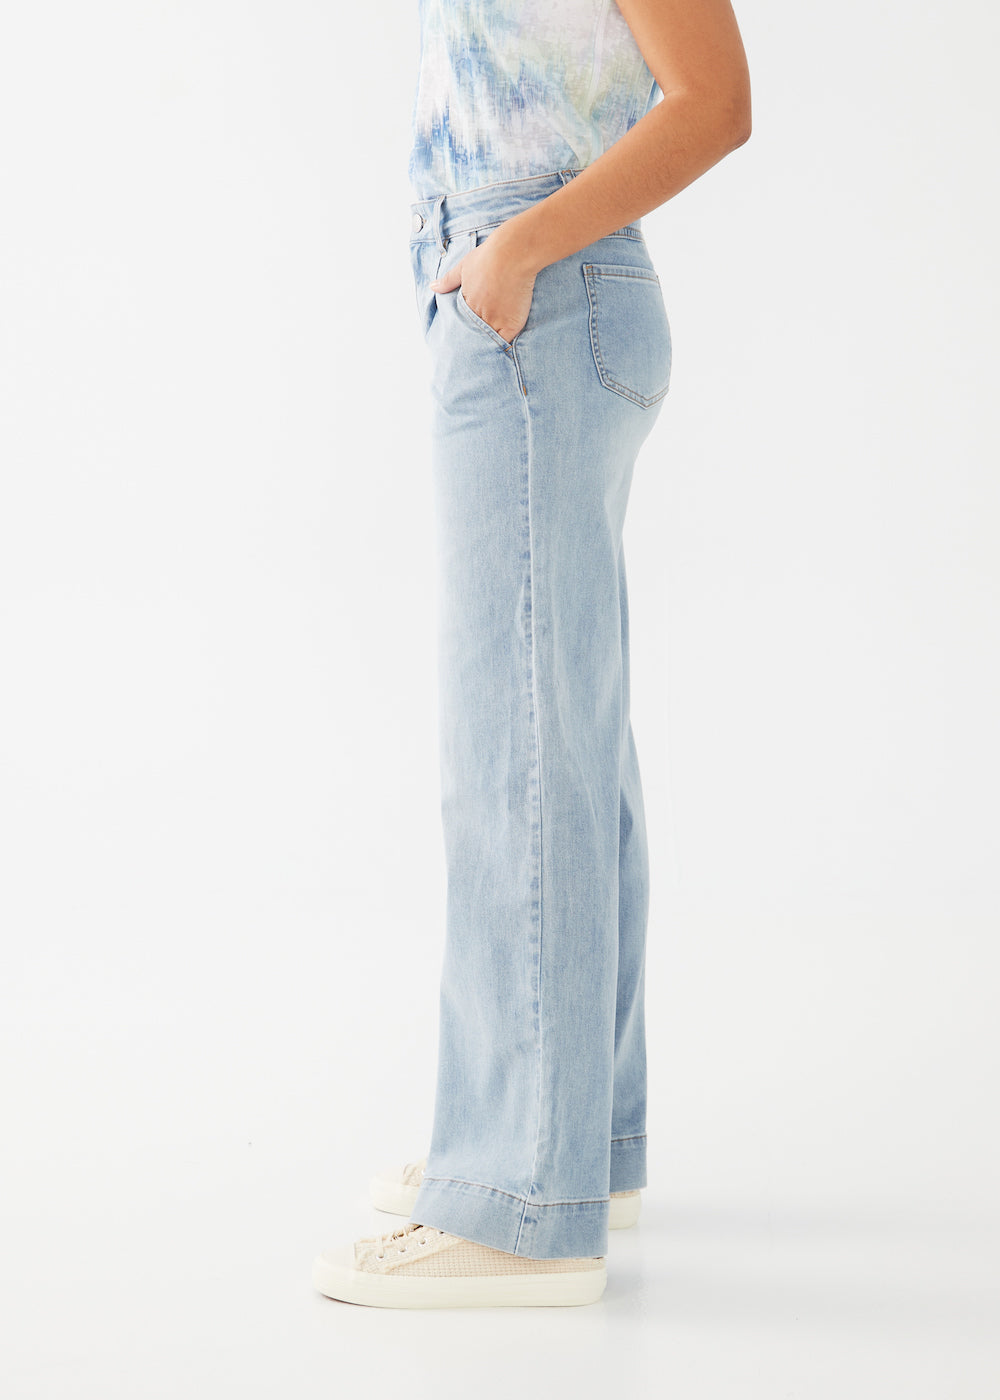 FDJ Olivia Wide Trouser - Light Clothing - Bottoms - Pants - Casual by French Dressing Jeans | Grace the Boutique